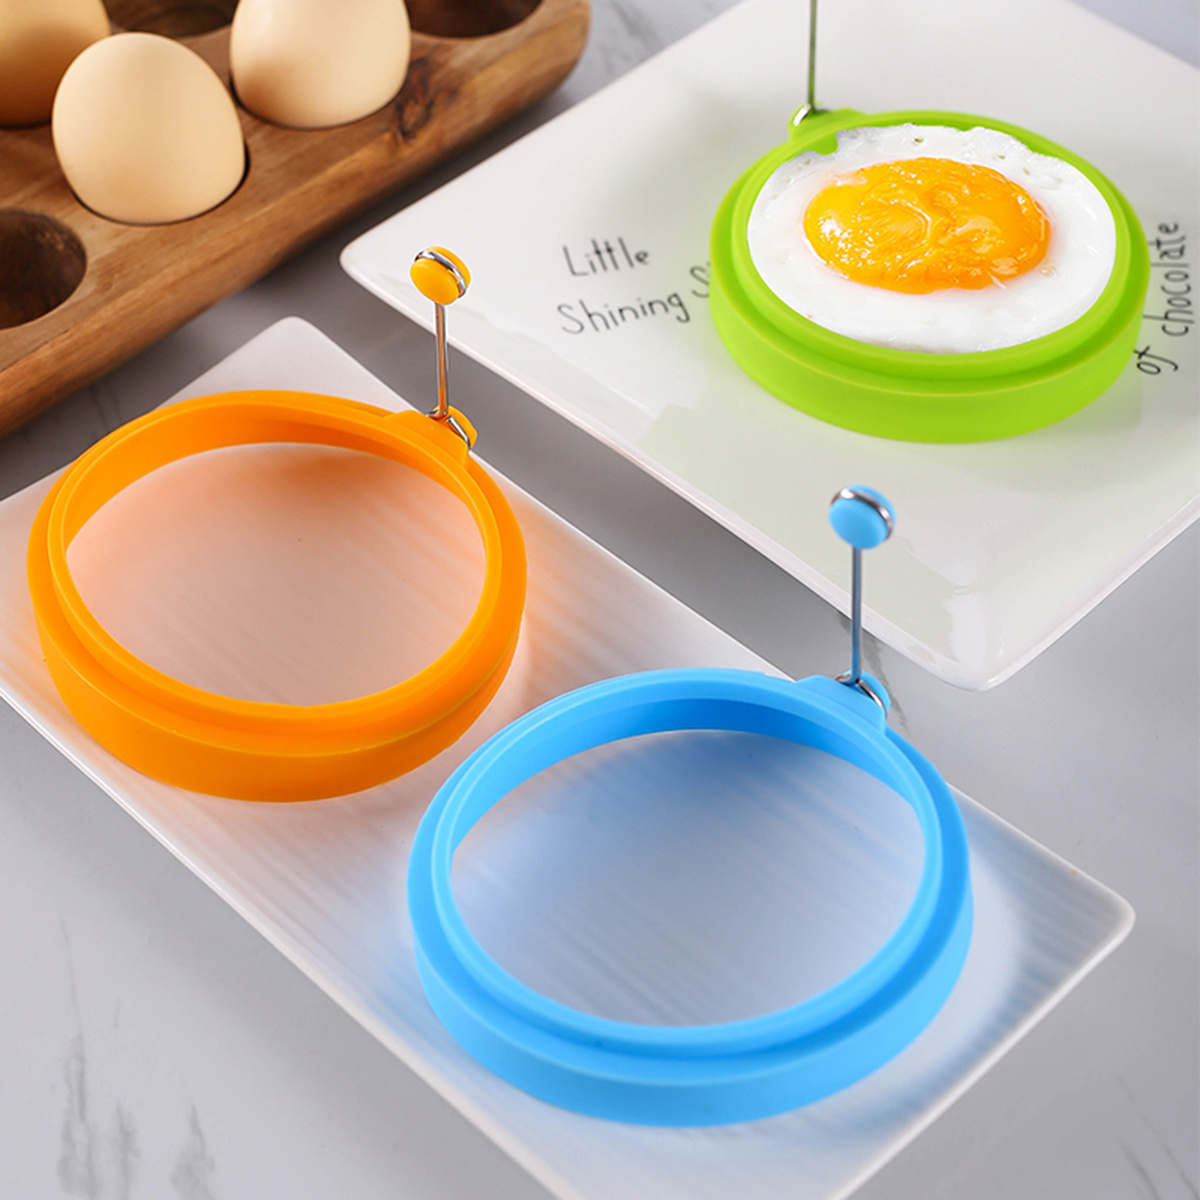 Non-slip Silicone Egg Omelette Maker - Heat Insulated And Easy To